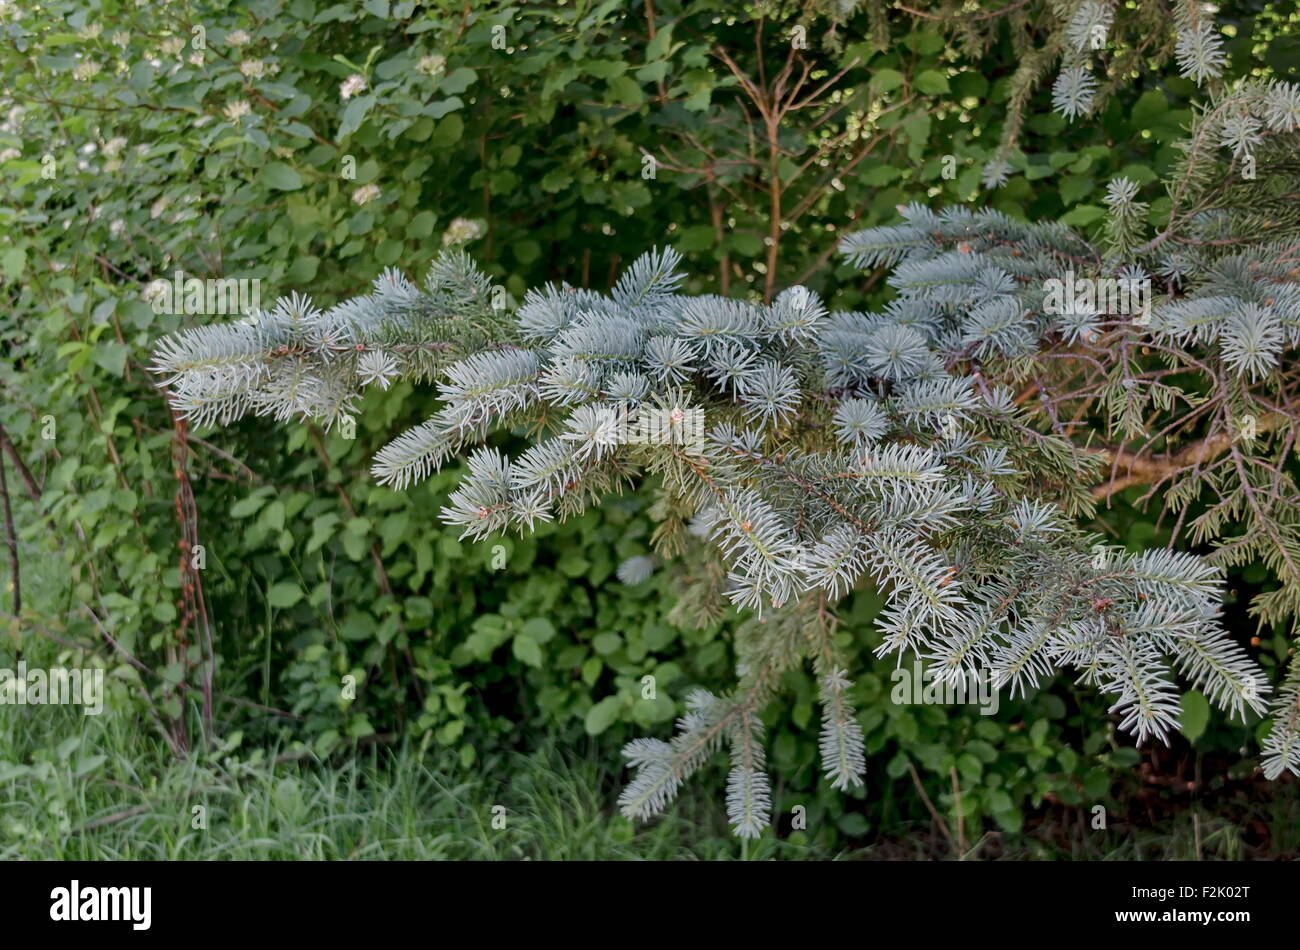 View on the branch of blue fir tree or blue spruce  (Picea pungens) in the garden Stock Photo